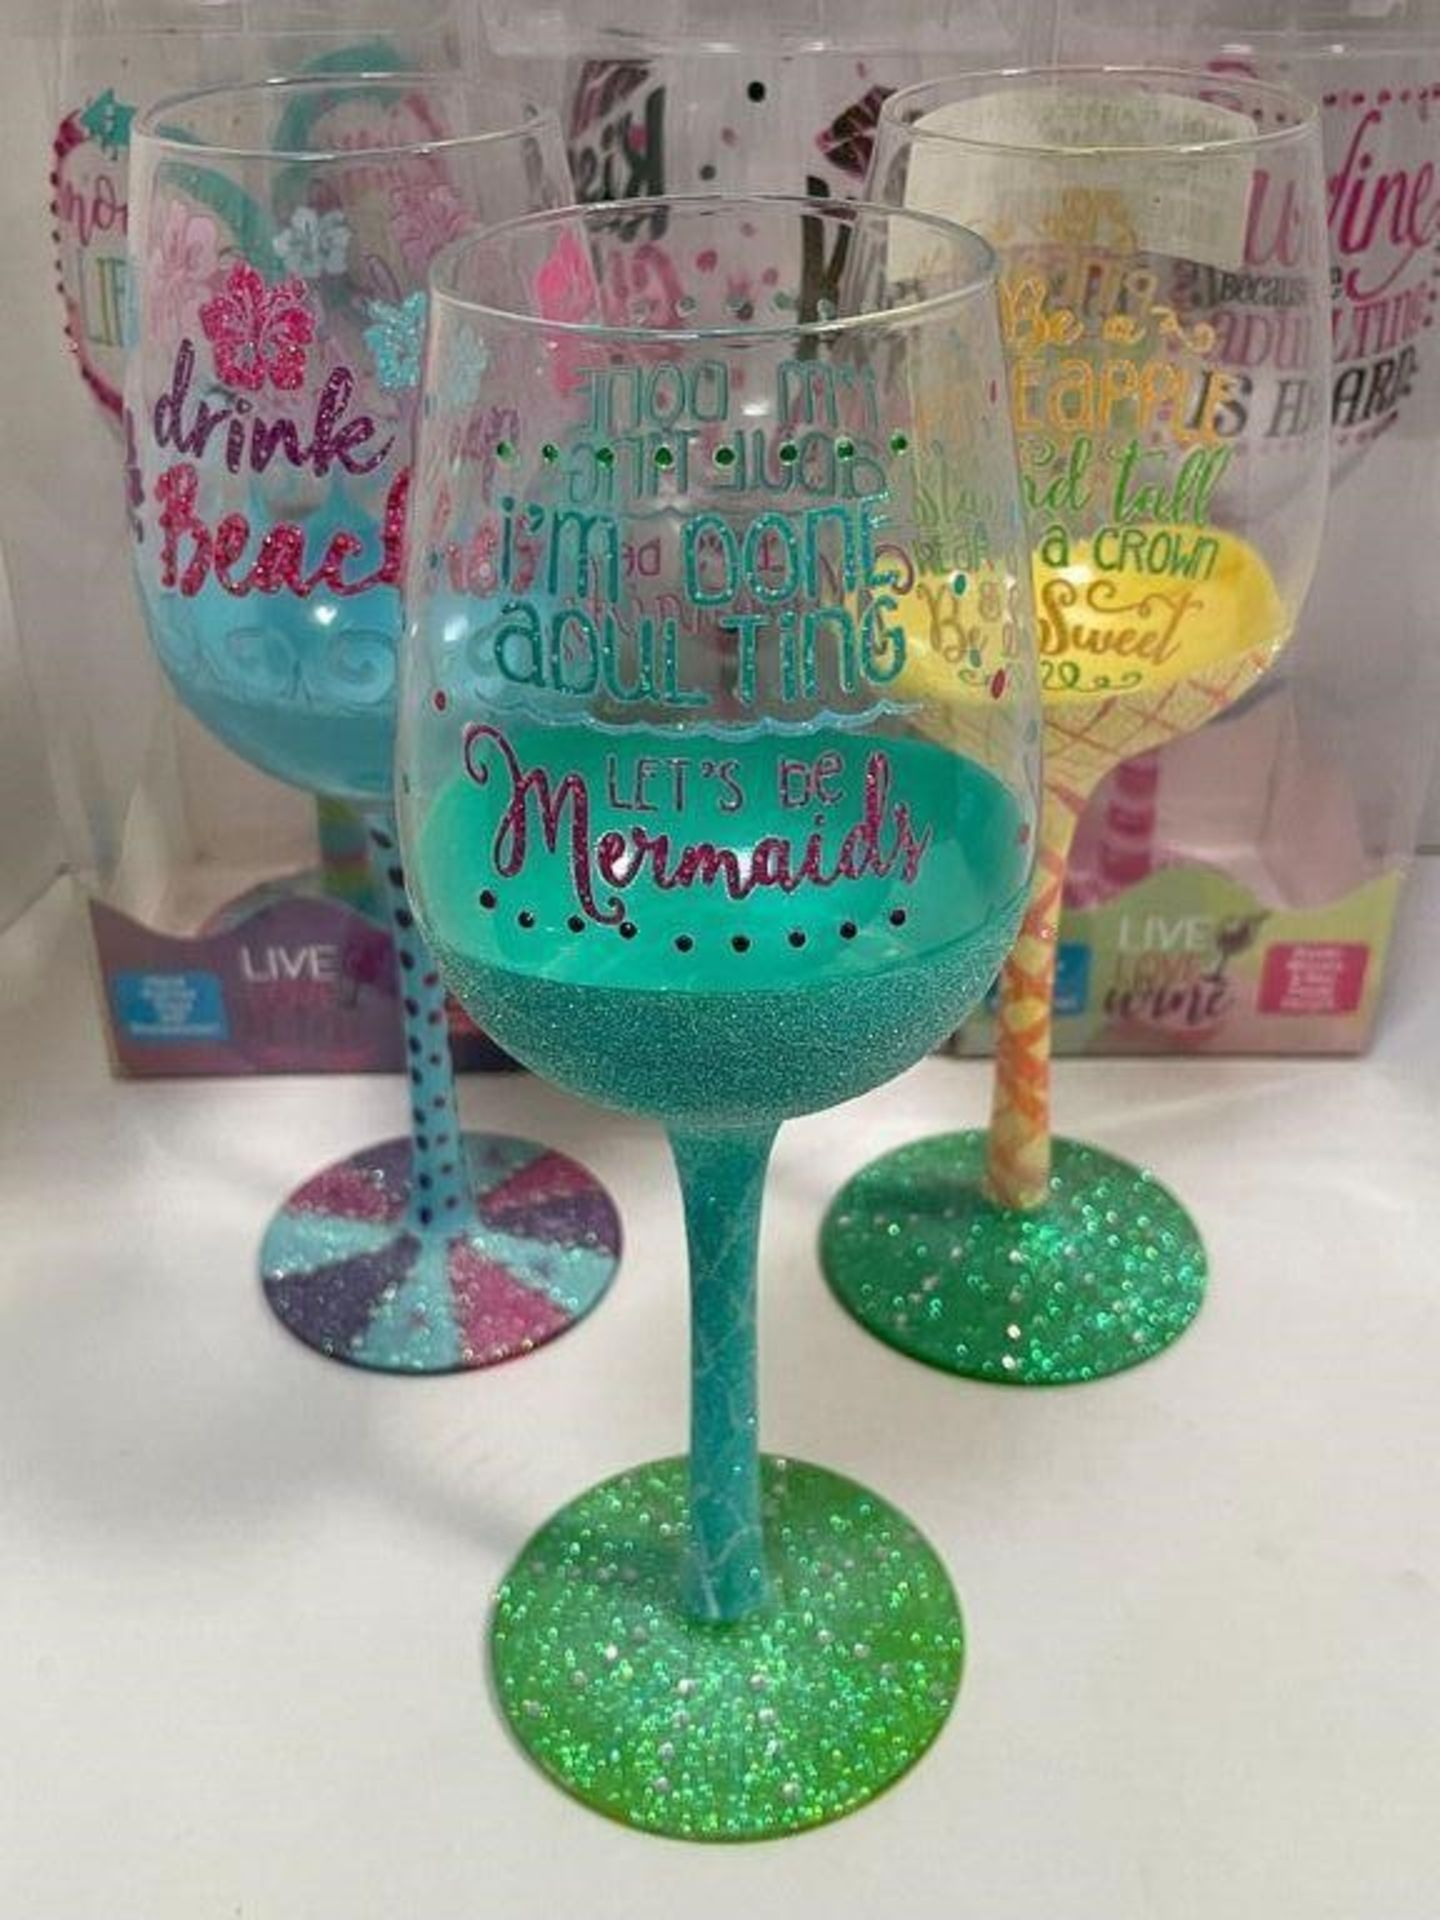 6 X DECORATED WINE GLASSES WITH FUN SAYINGS/PHRASES, VAROUS SAYINGS AND DESIGNS - Image 2 of 5